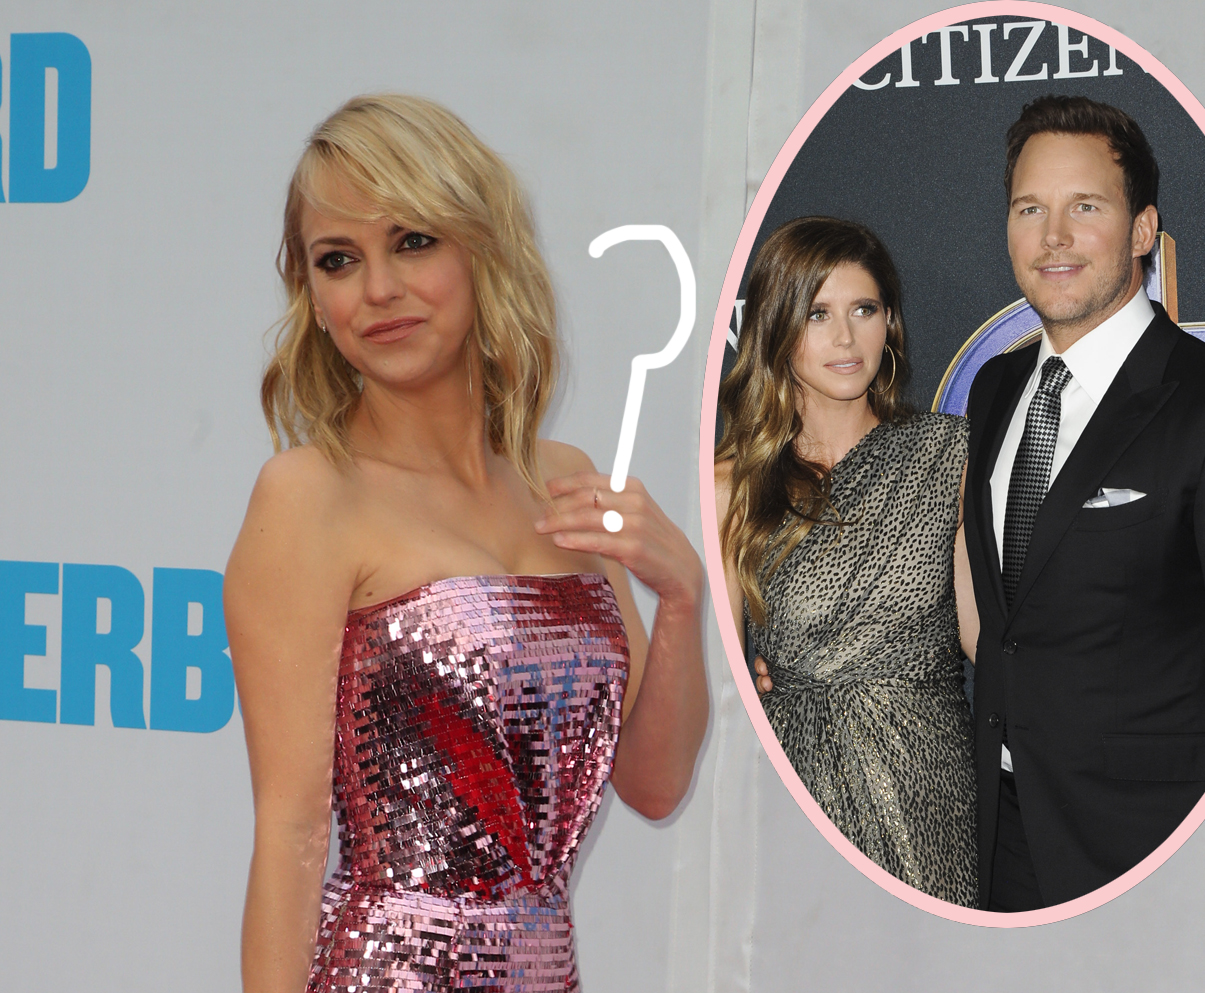 Anna Faris Engaged Again?? Spotted Wearing HUGE Ring After 2 Years Of ...